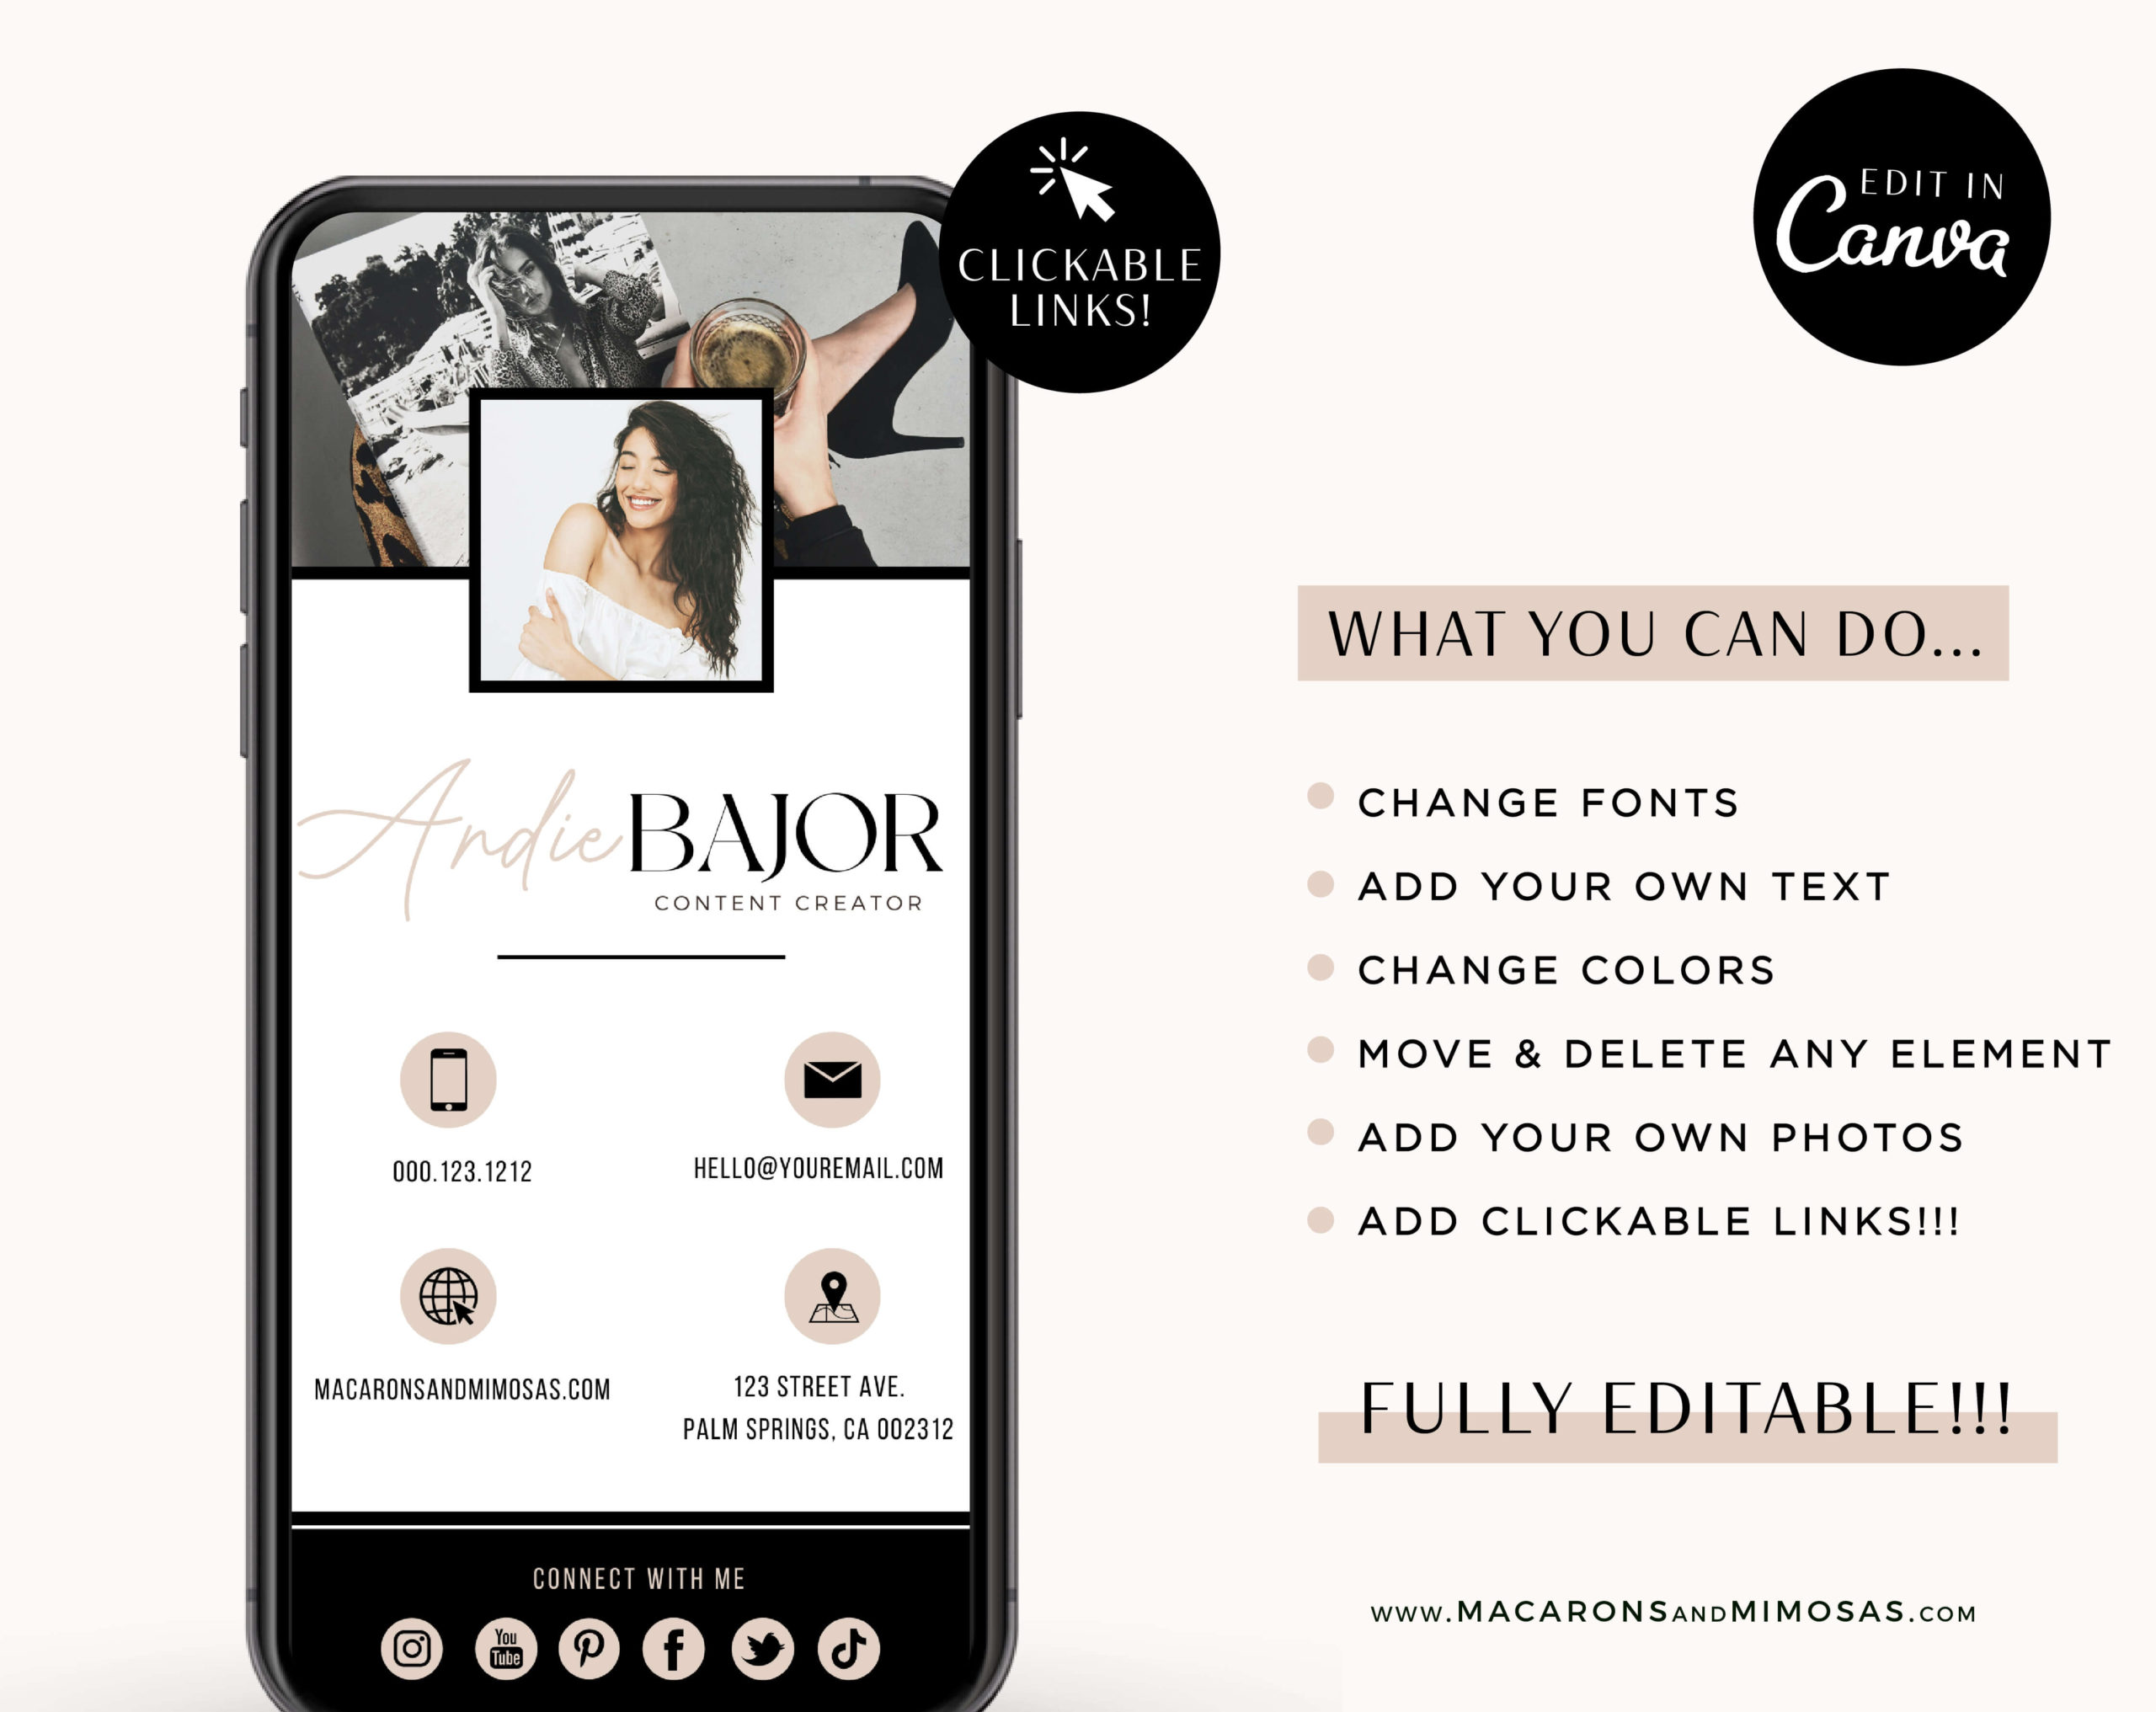 Digital business card Canva template with clickable links, How to create DIY Modern Minimalist Blush Black Real Estate Digital Business Card